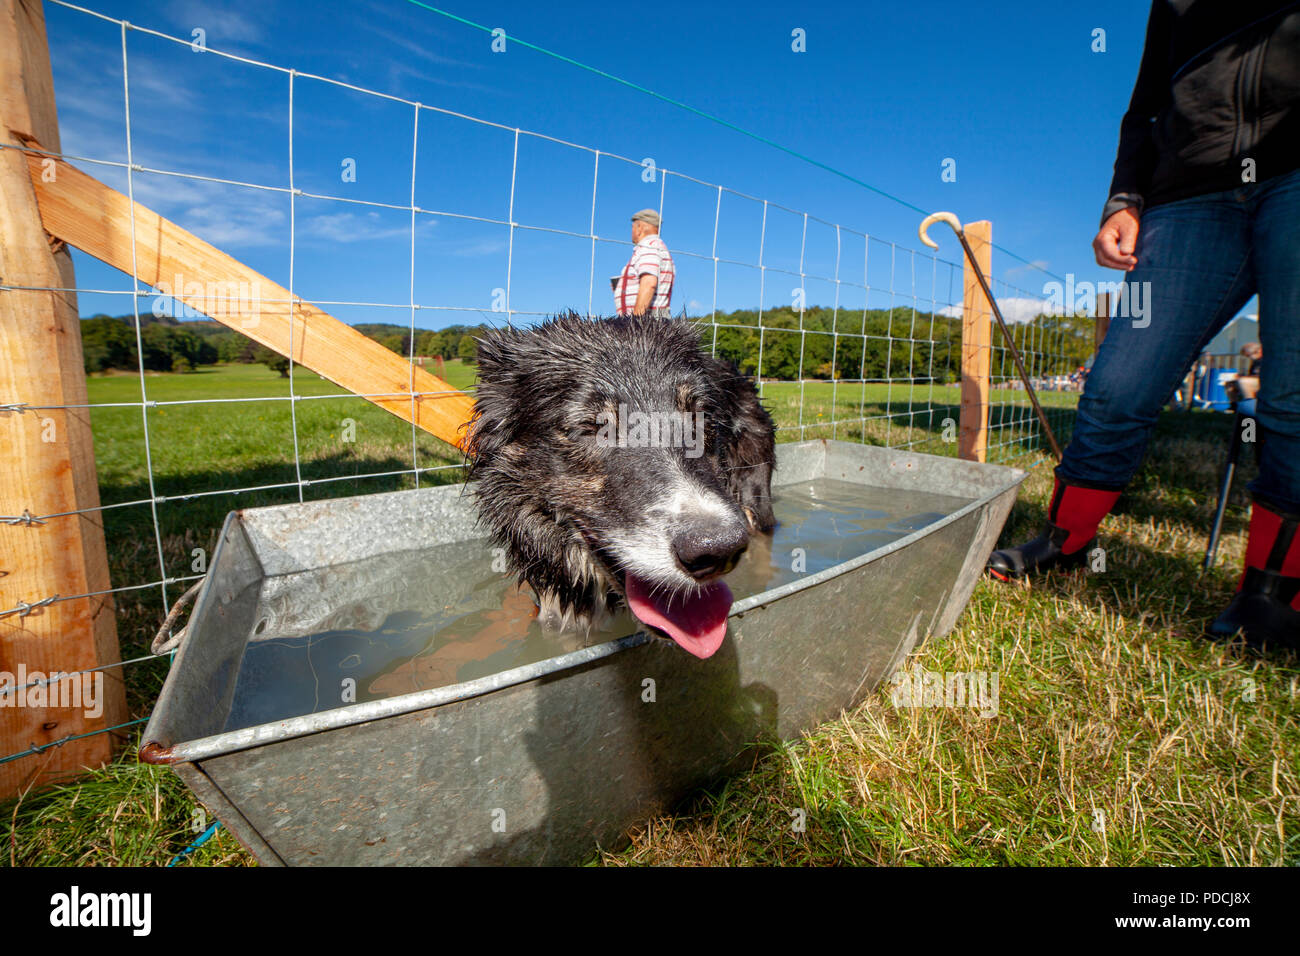 Nannerch, North Wales, UK Weather: Hot and sunny weather perfect for the Welsh National Sheep Dog Trials being held in the rural village of Nannerch at the Penbedw Estate in Flintshire. A sheep dog called Brenig Taran relaxing in the cold water provided for the dogs to cool down after competing at the National Sheep Dog Trials in the hot weather, Nannerch, Flintshire Stock Photo